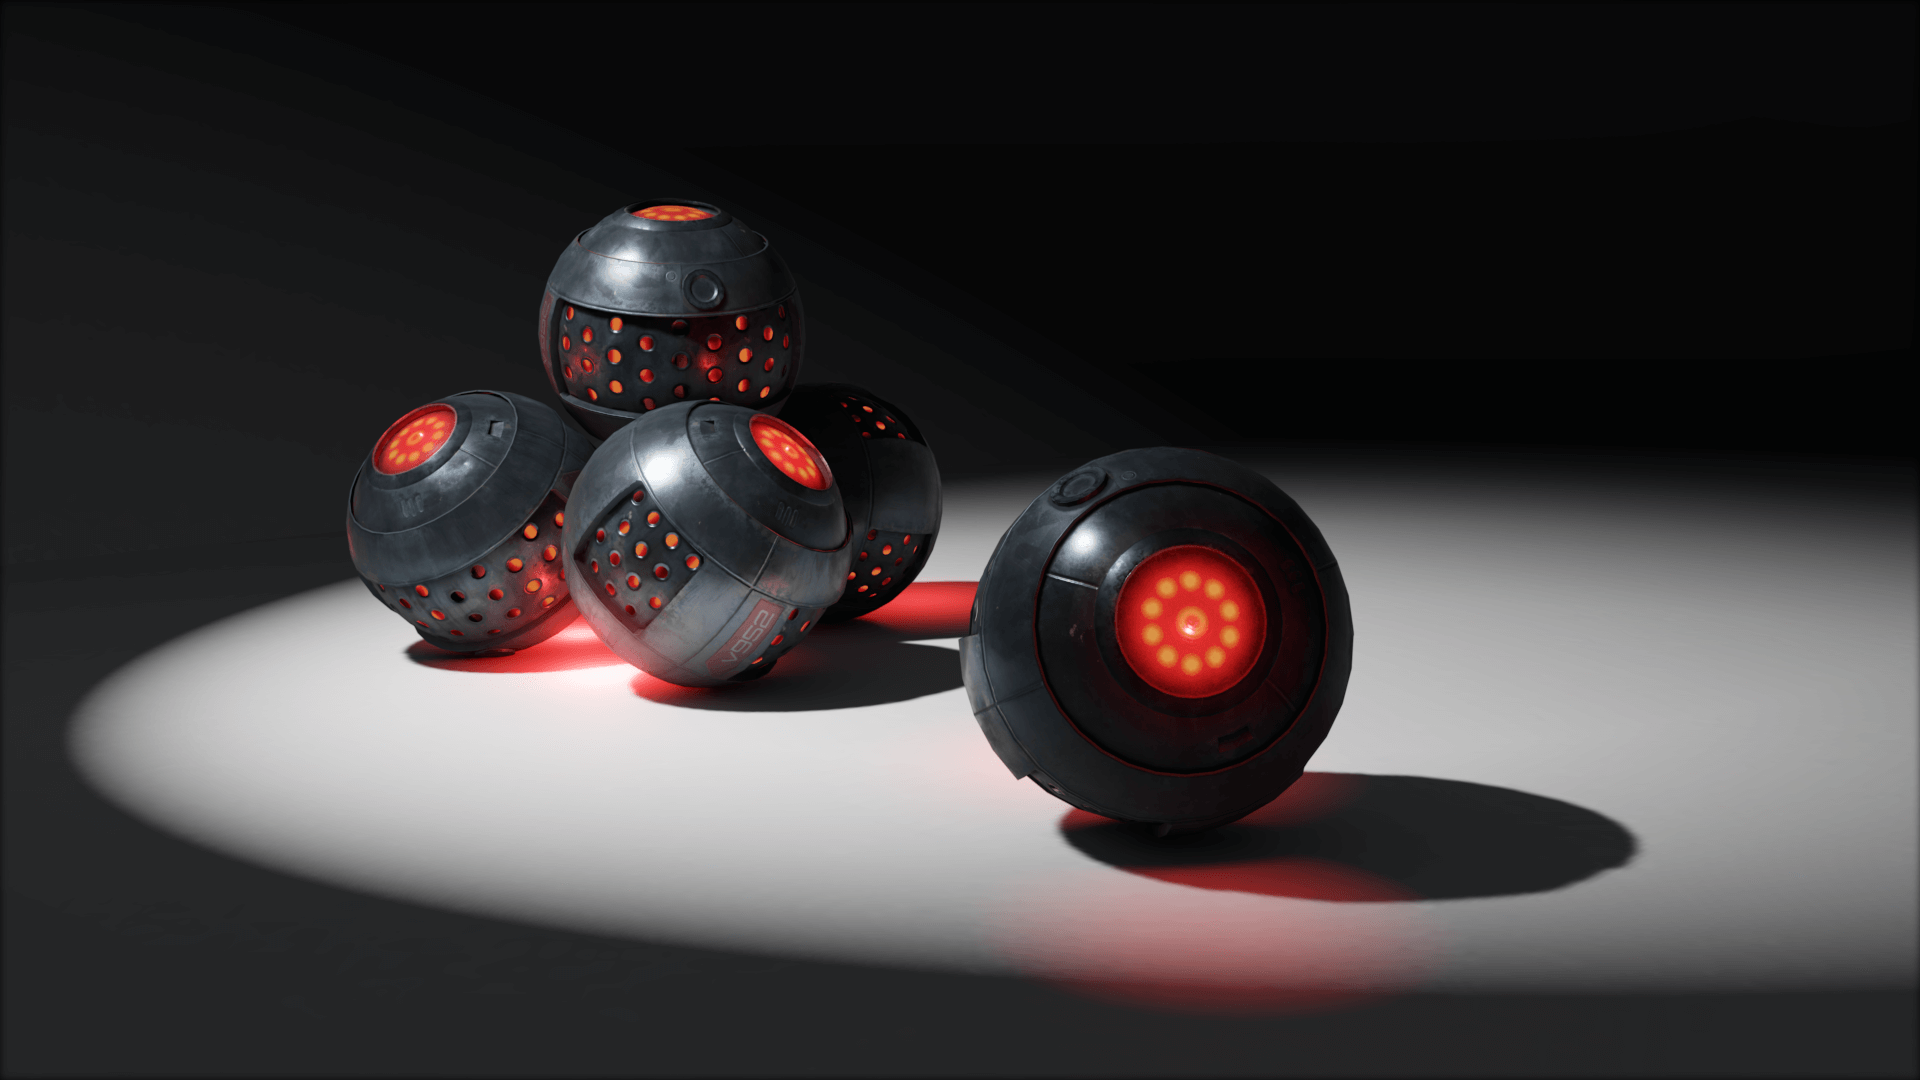 Remastered helicopter bombs. They 're metallic, orb-shaped, and glowing red.